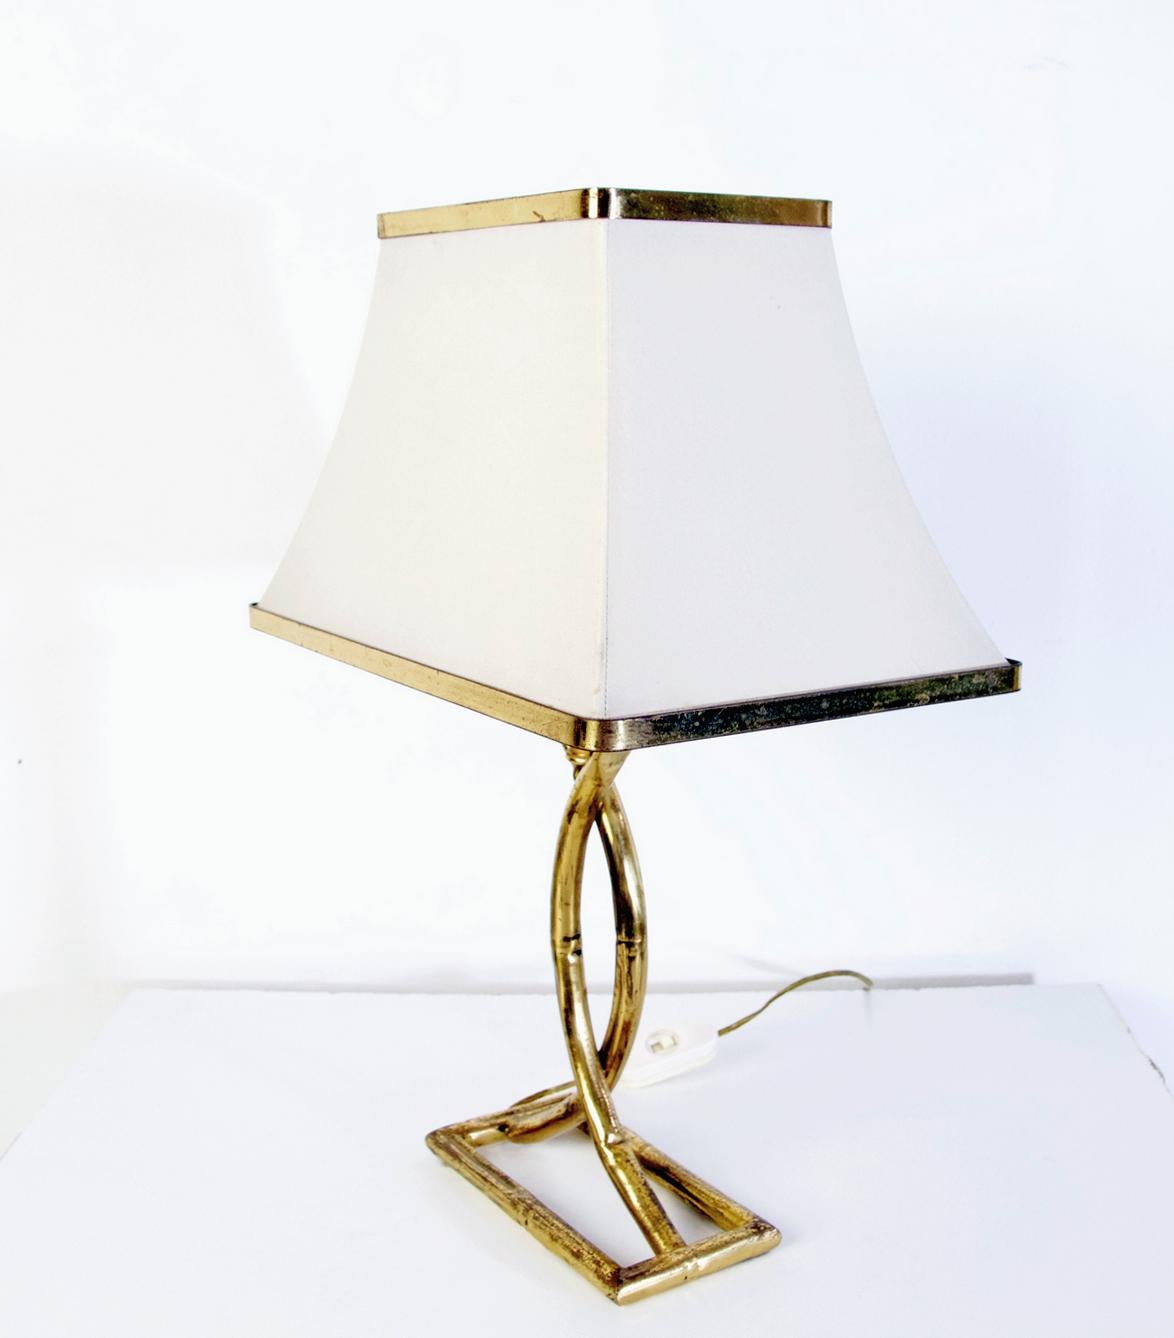 Pair of Italian Vintage Table Lamps in Brass, 1970's In Good Condition For Sale In Albano Laziale, Rome/Lazio